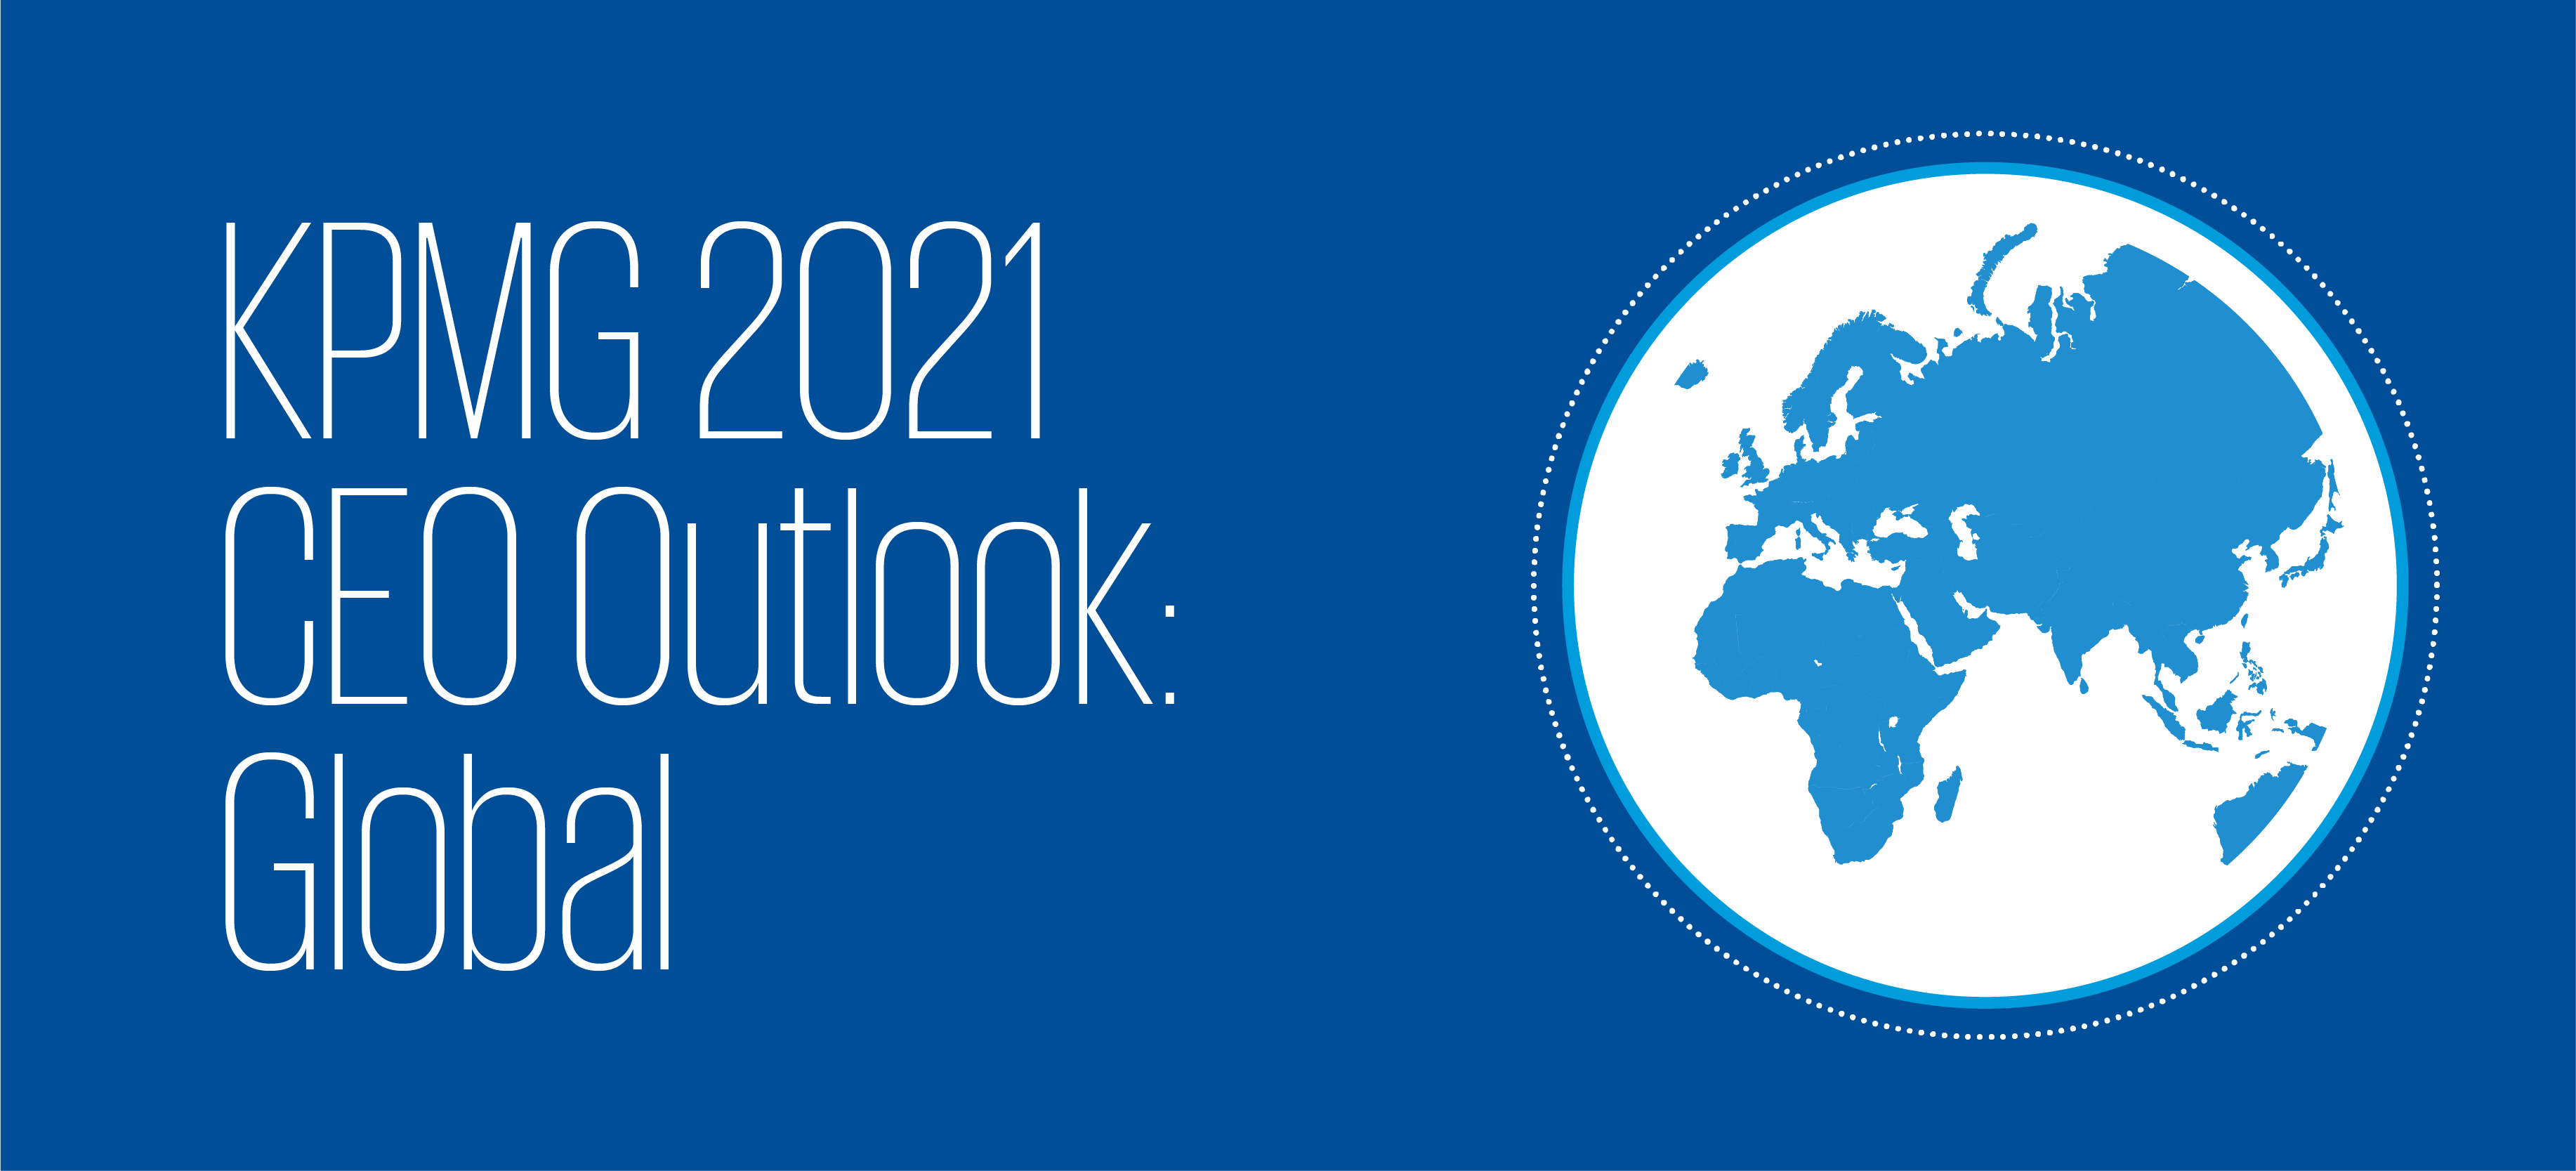 KPMG 2021 CEO Outlook